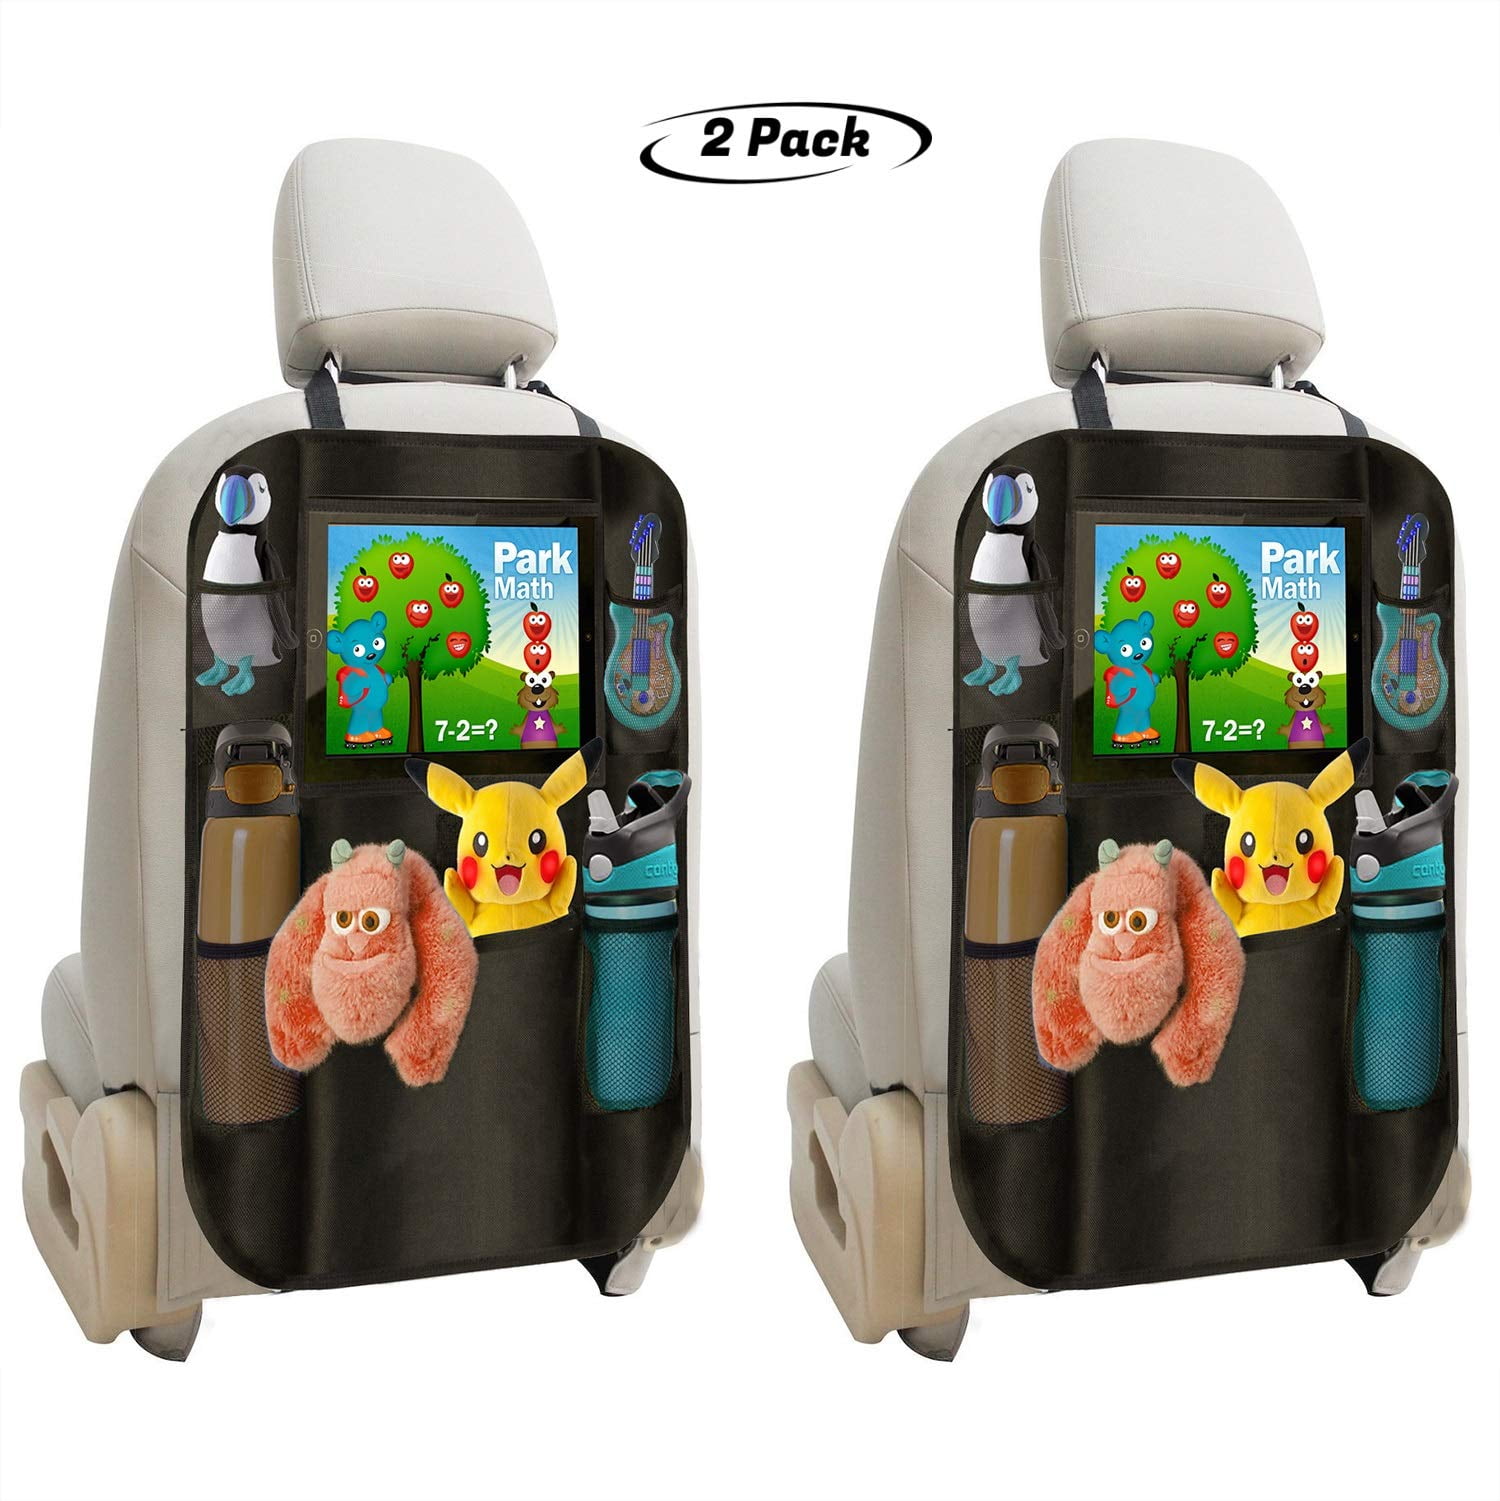 Car Auto Backseat Touch Screen Tablet iPad Holder for Kids to Keep Them Entertained Multi-Pocket Travel Trash Storage Magazine Holder Hanging Car Seat Back Seat Organizer for Vehicle 